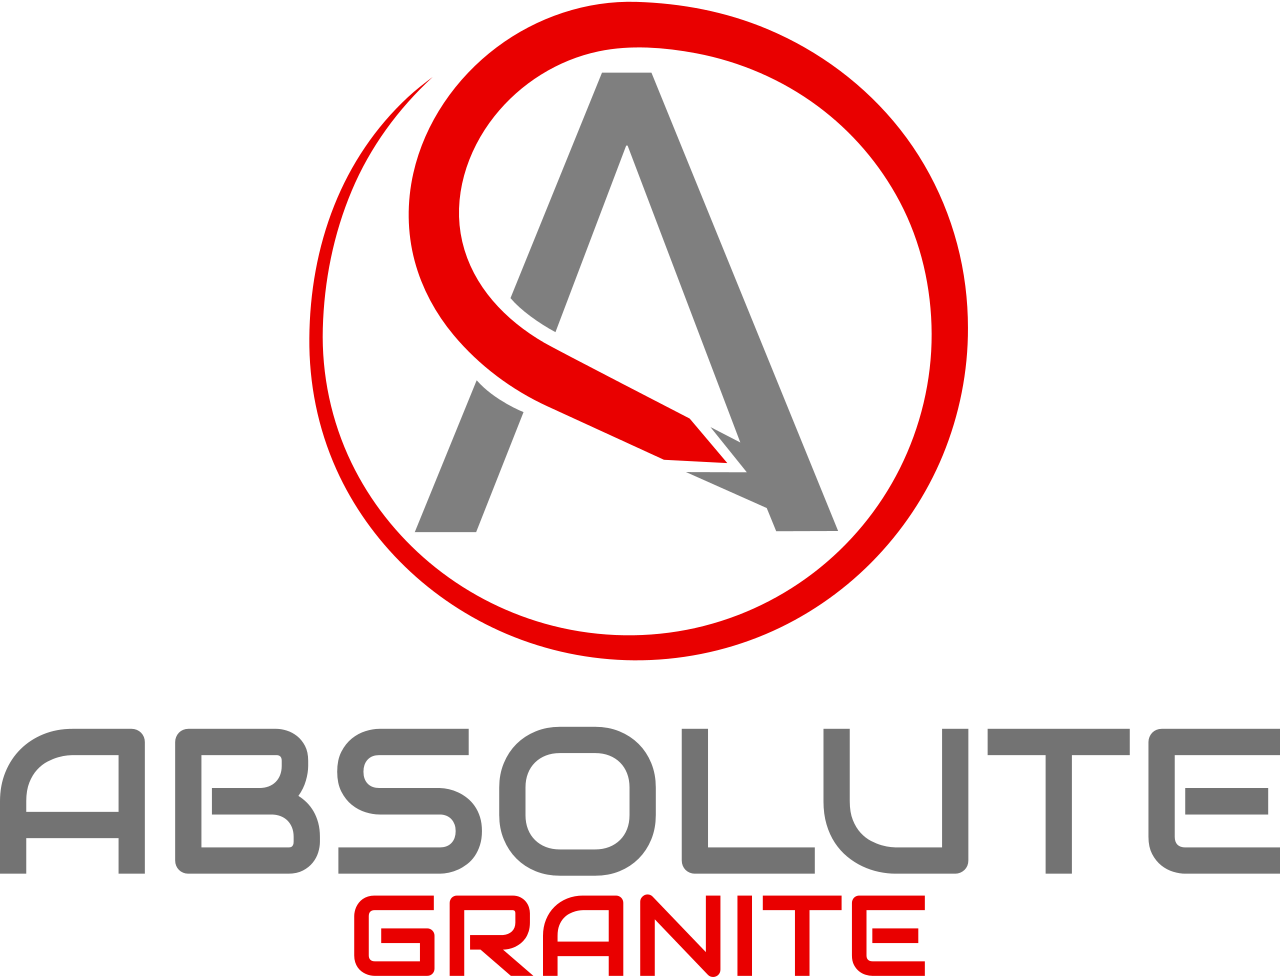 ABSOLUTE's logo